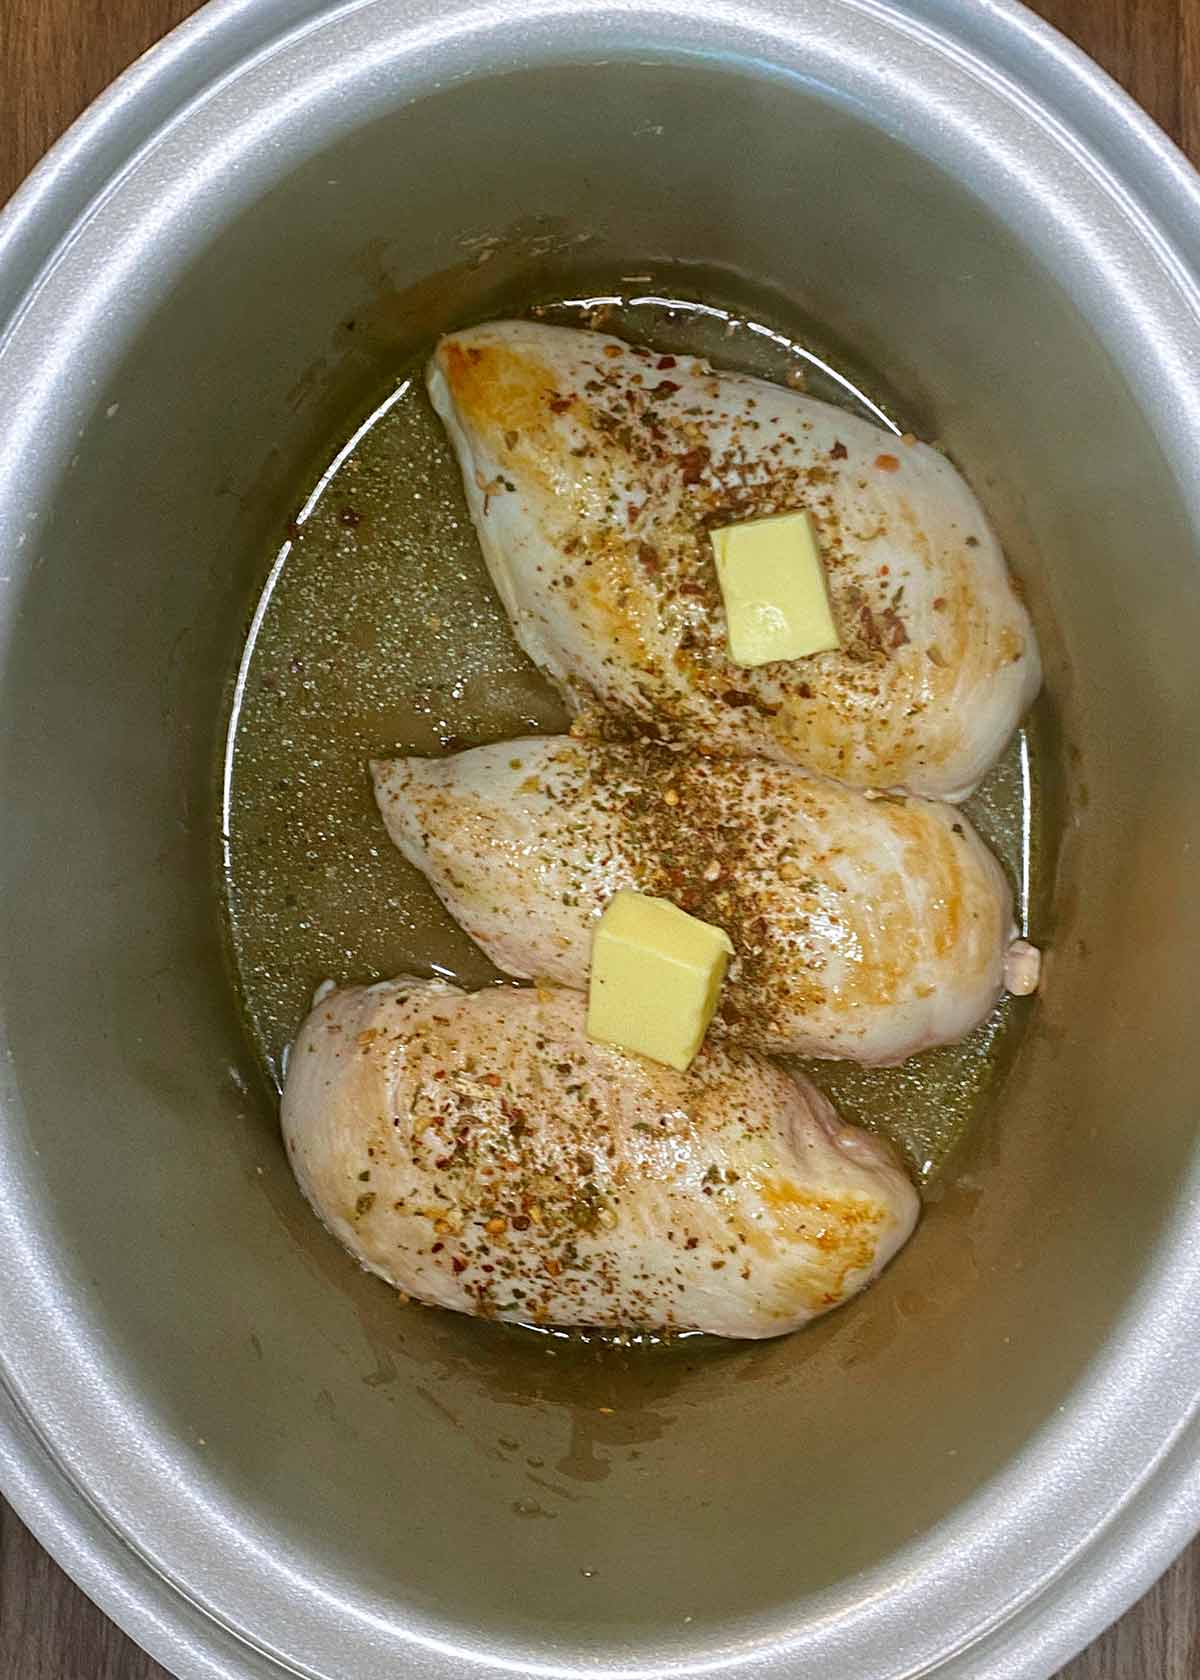 Stock, seasoning and butter added to the slow cooker.